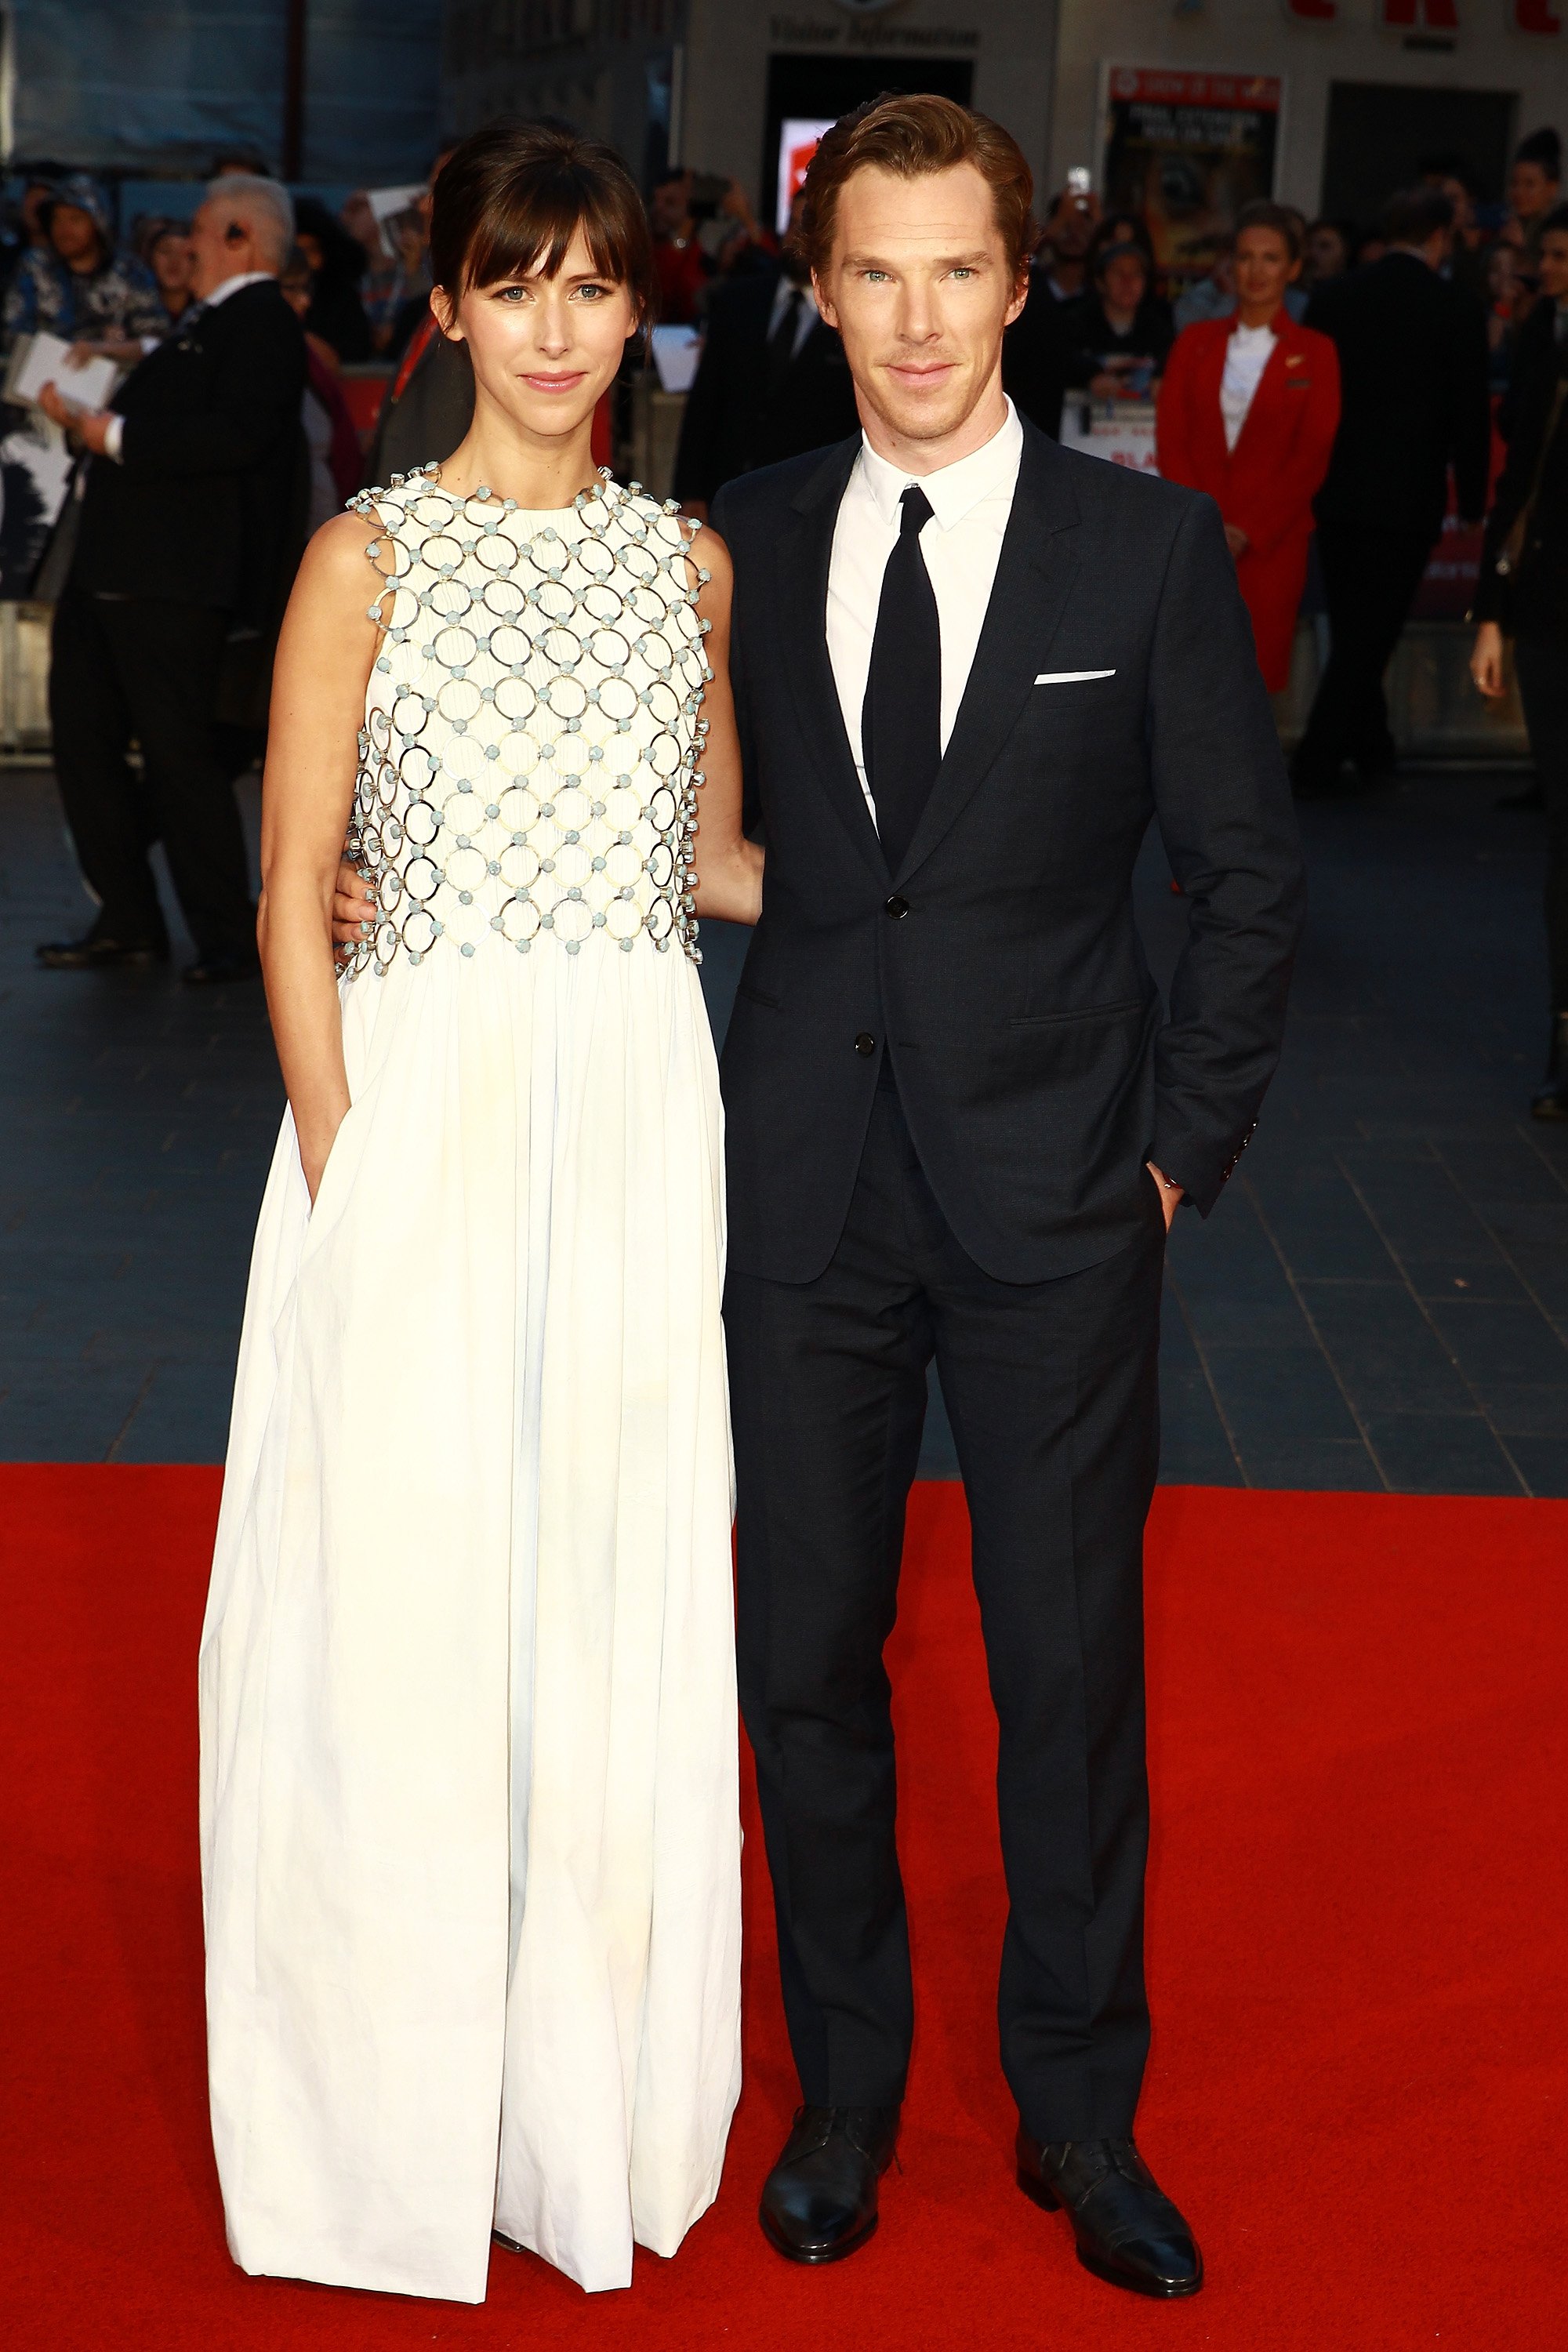 Benedict Cumberbatch and hsi wife Sophie Hunter attend the Black Mass Virgin Atlanitc Gala during the BFI London Film Festival at Odeon Leicester Square on October 11, 2015, in London, England. | Source: Getty Images